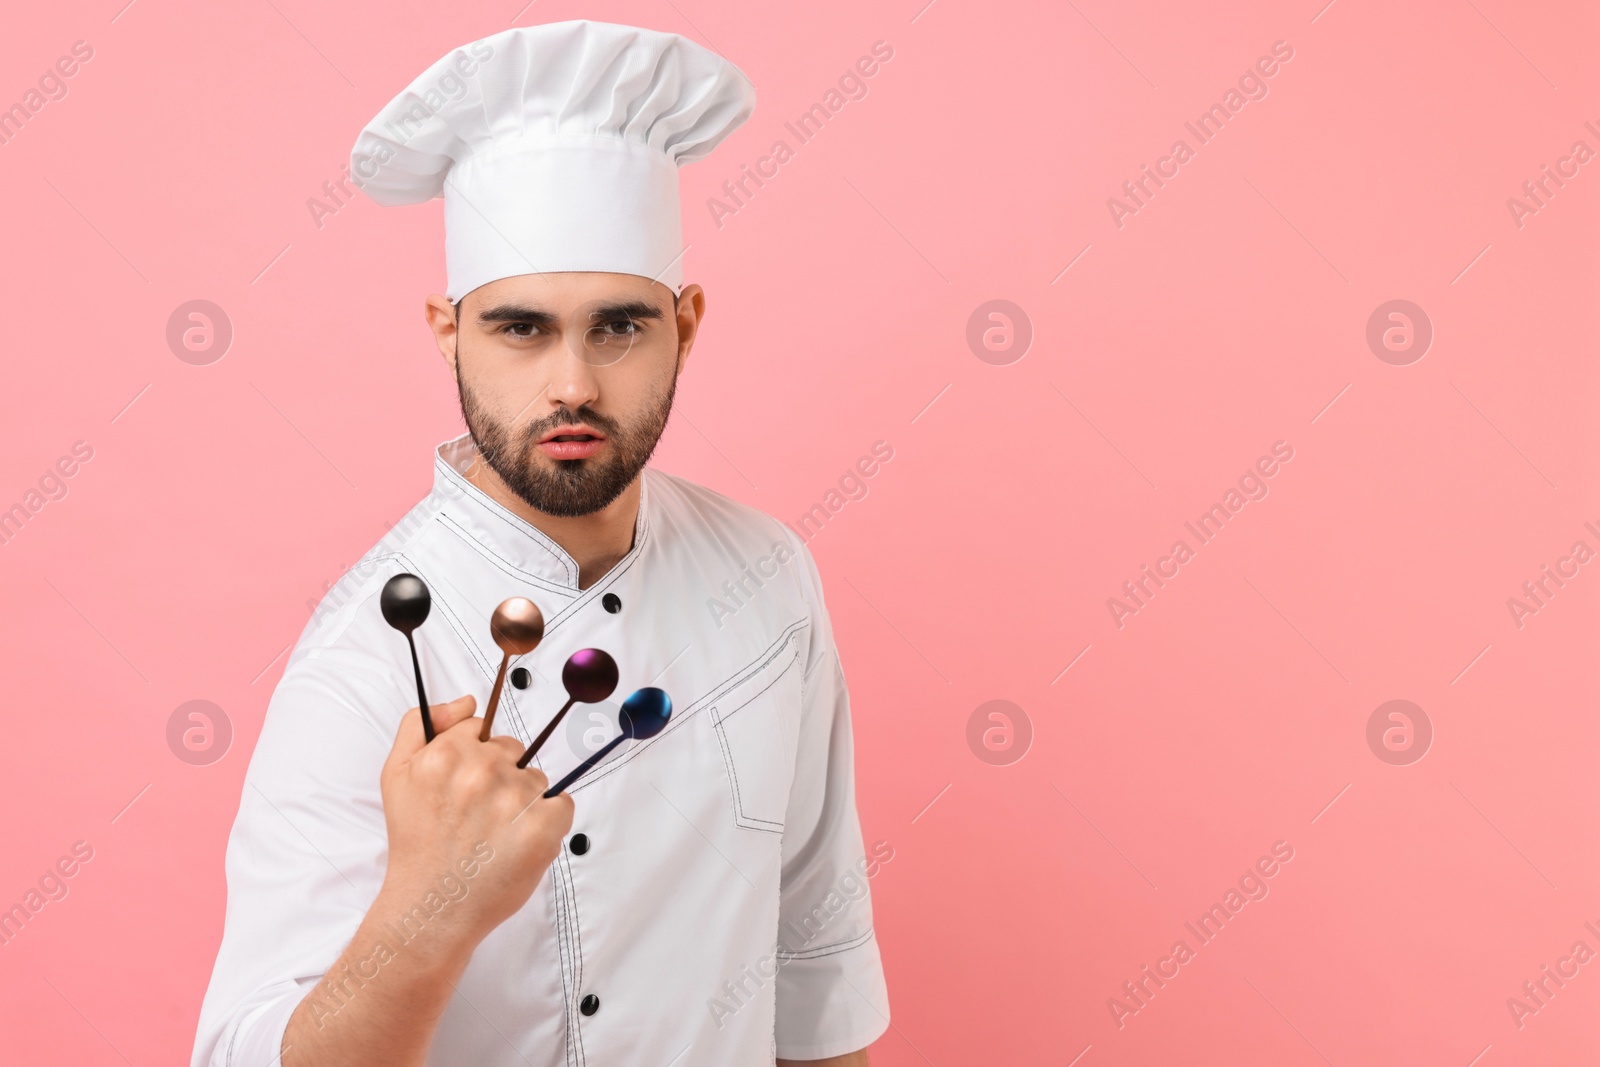 Photo of Professional chef holding kitchen utensils on pink background. Space for text